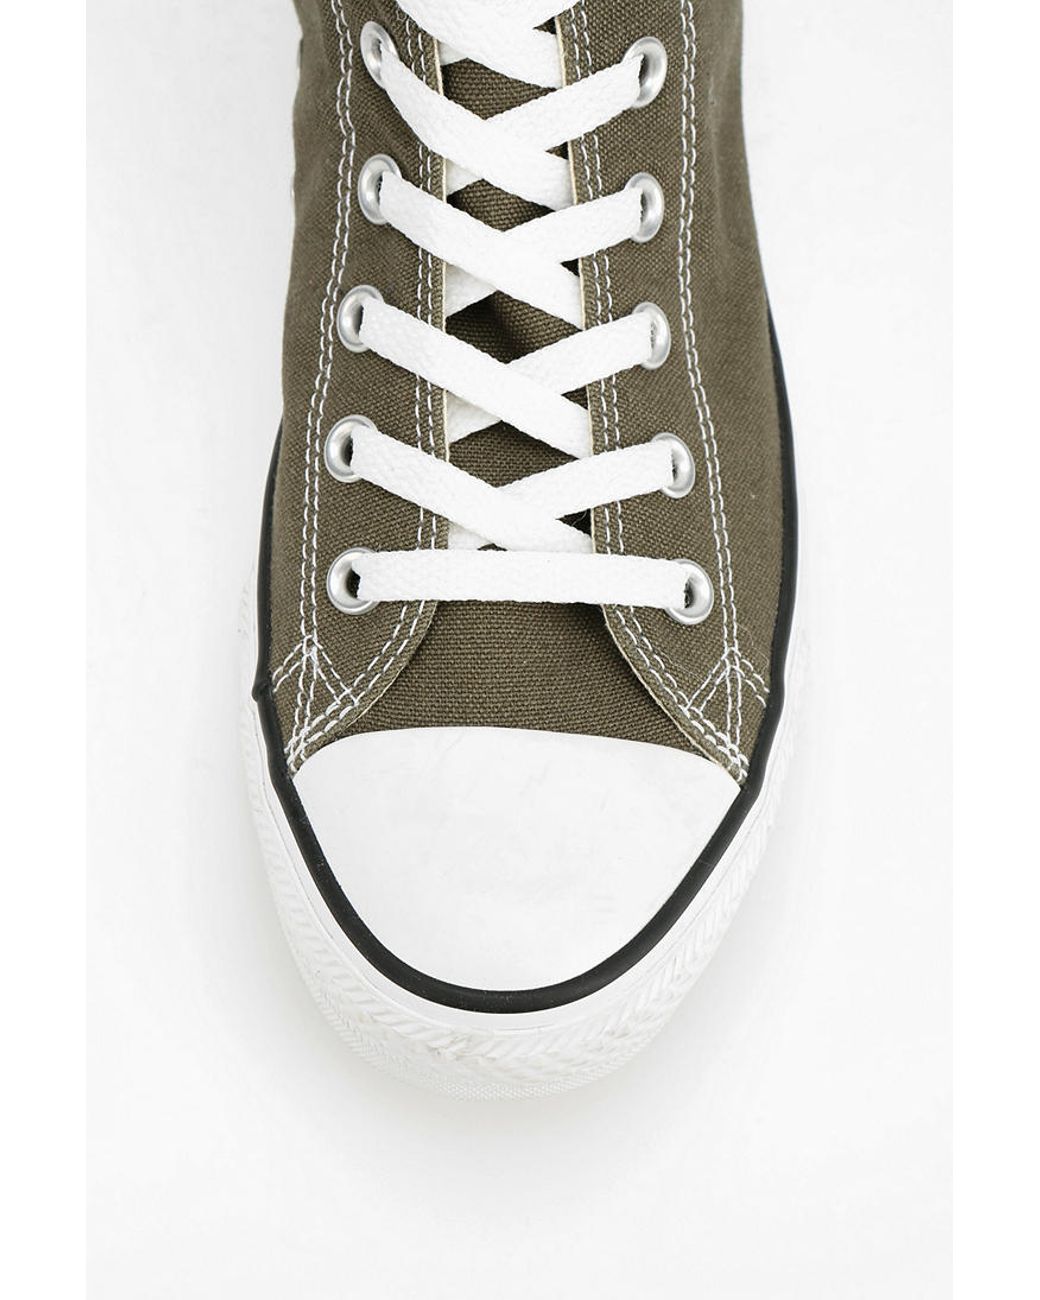 Converse Chuck Taylor All Star Womens Hightop Sneaker in Green | Lyst